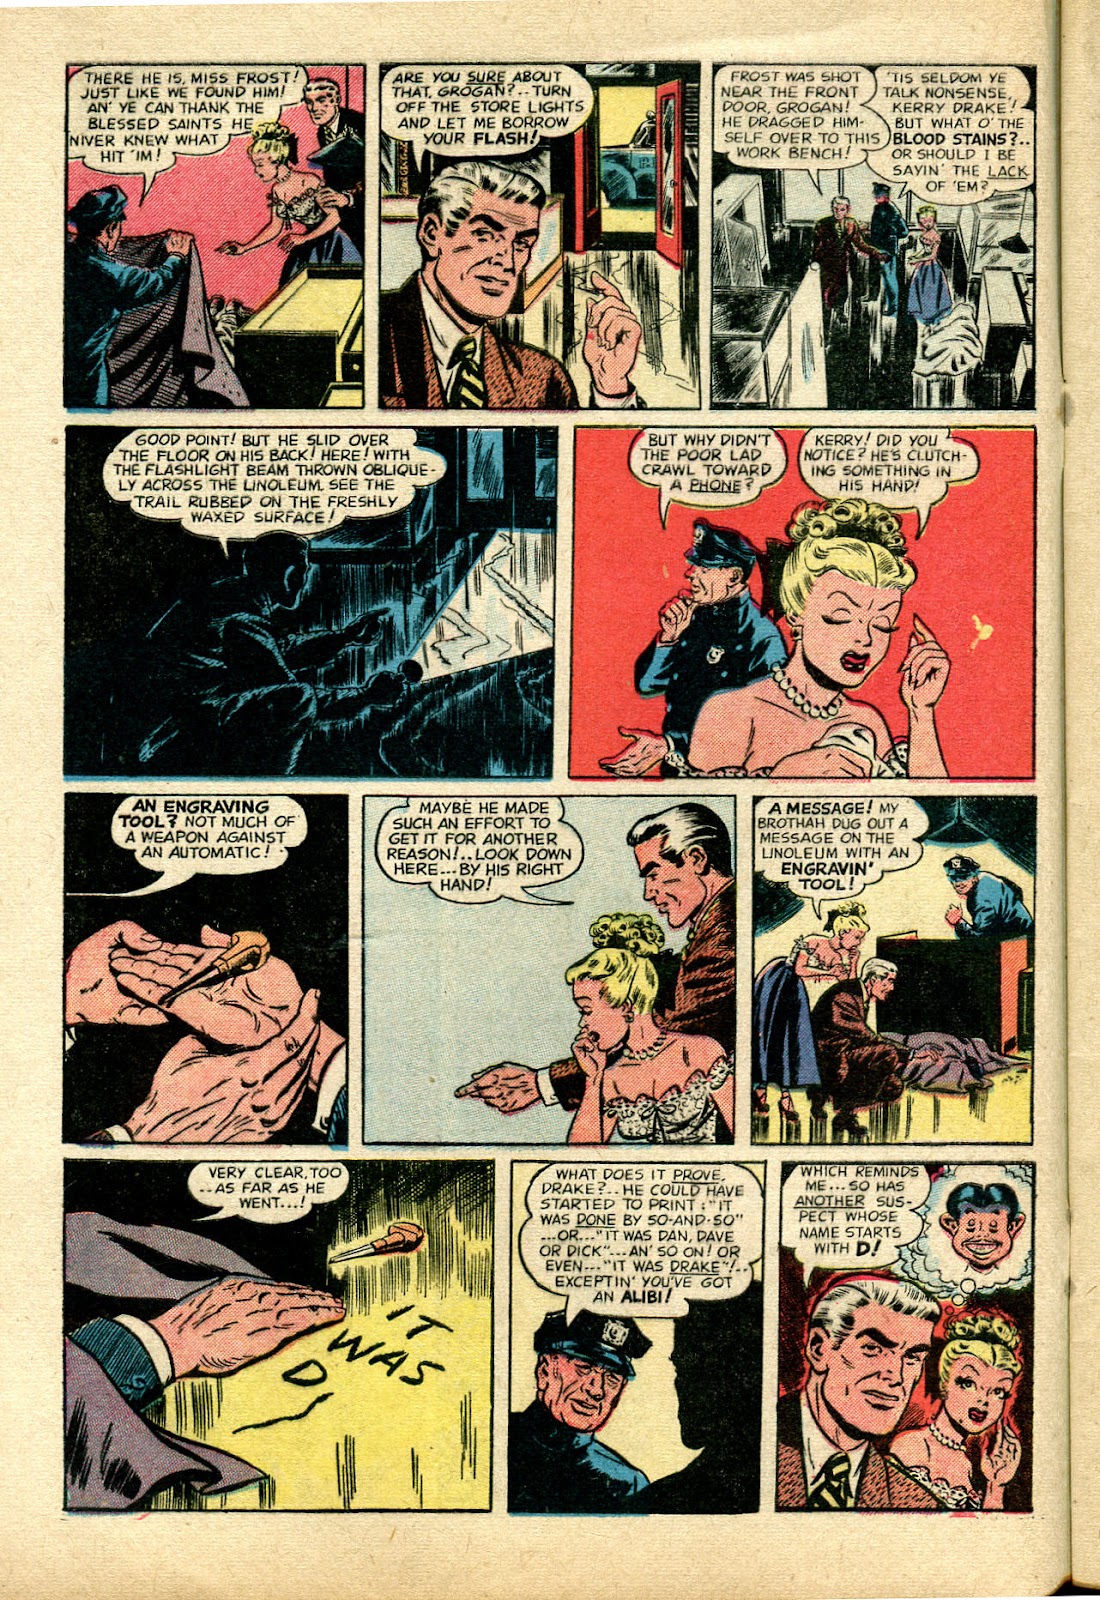 Kerry Drake Detective Cases issue 22 - Page 9